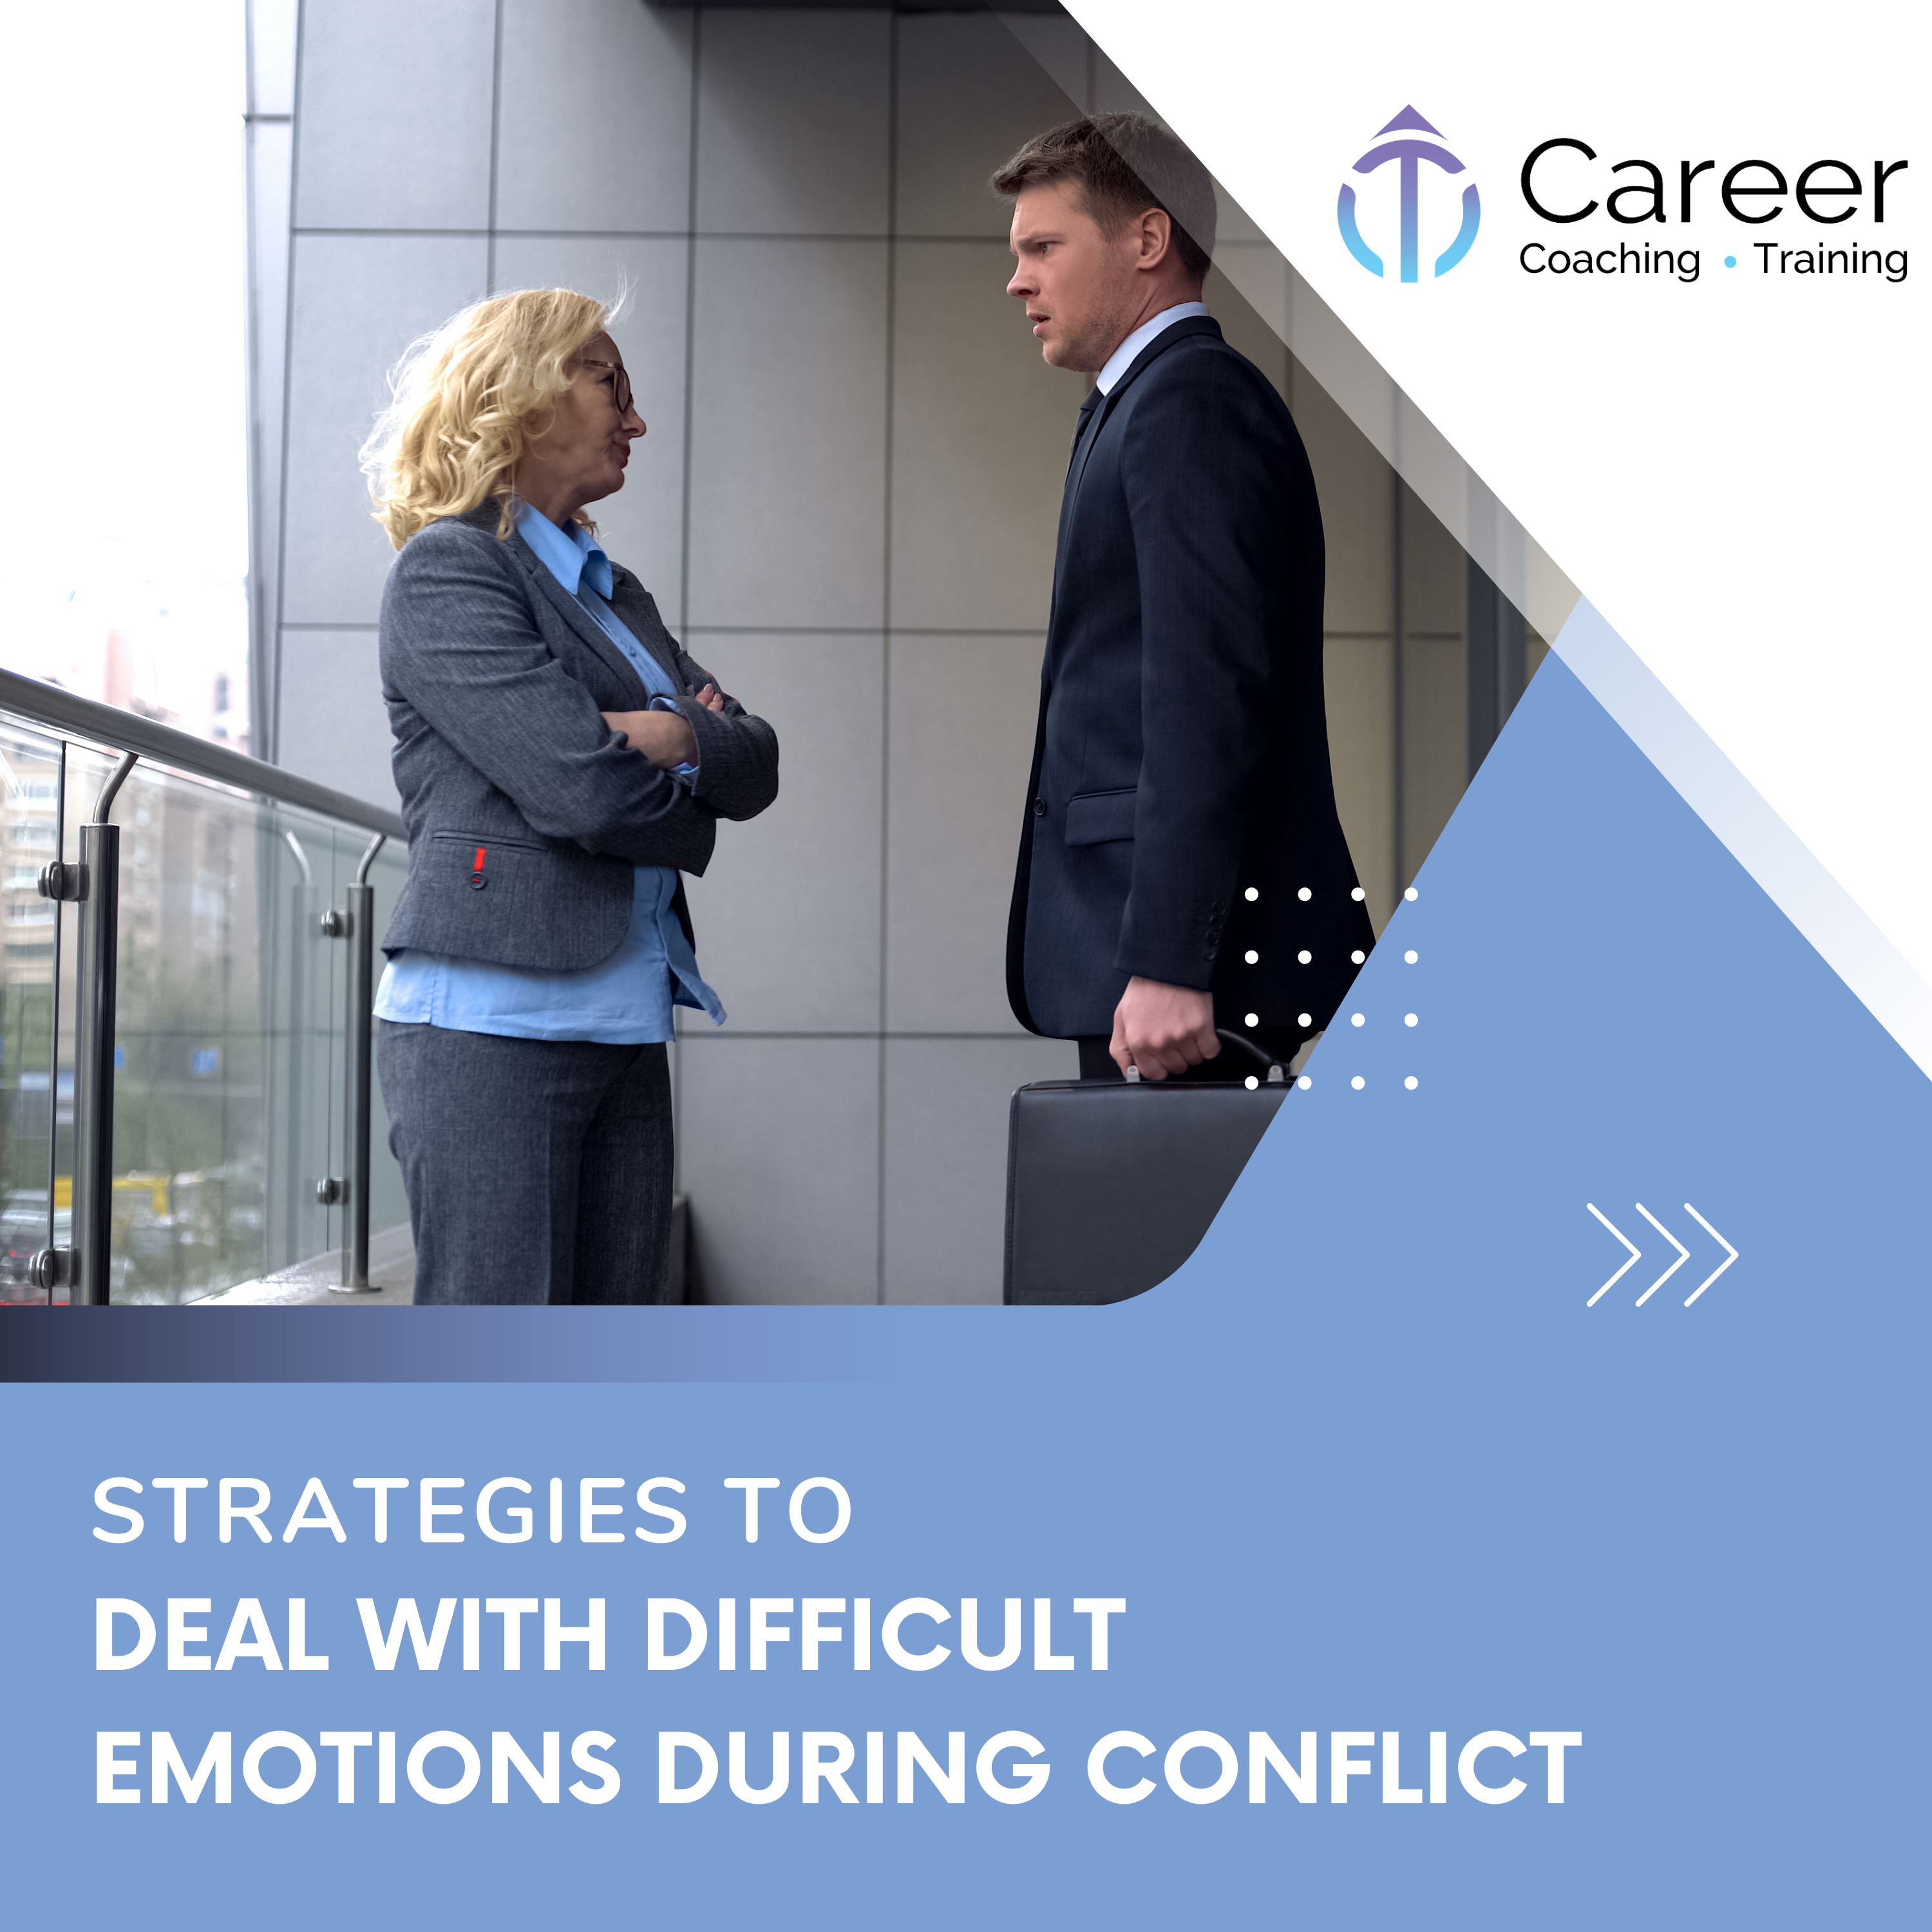 Strategies to Deal with Difficult Emotions During Conflict